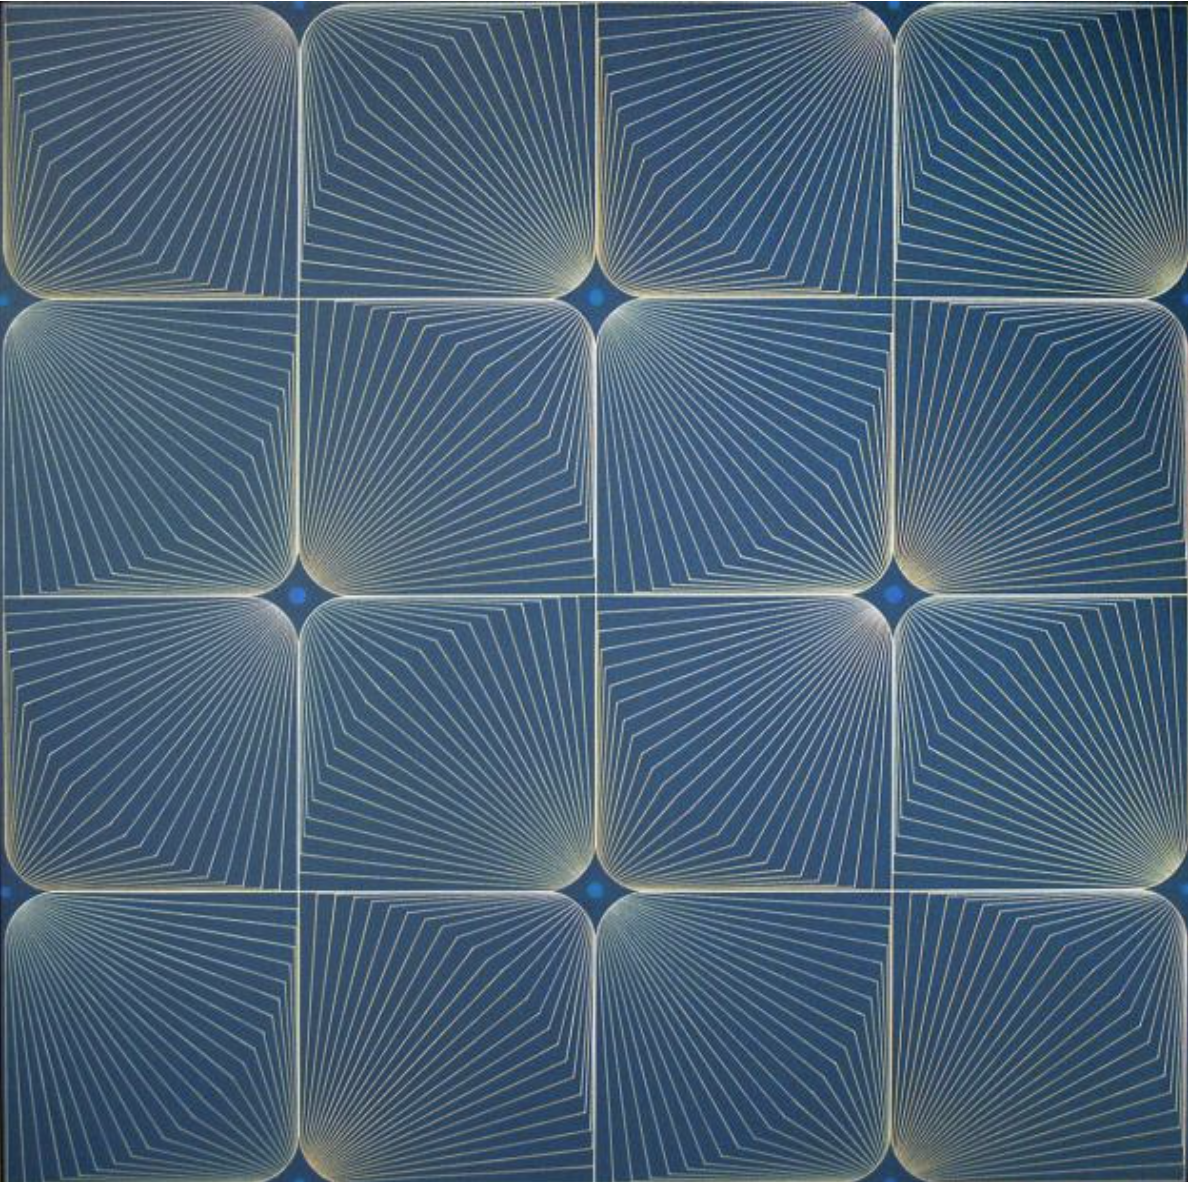 Edna Andrade (American, 1917–2008), Radiants, 1976, acrylic on canvas, 41 x 41 inches. Reading Public Museum, Gift of Luther W. Brady, M.D., 2012.15.1